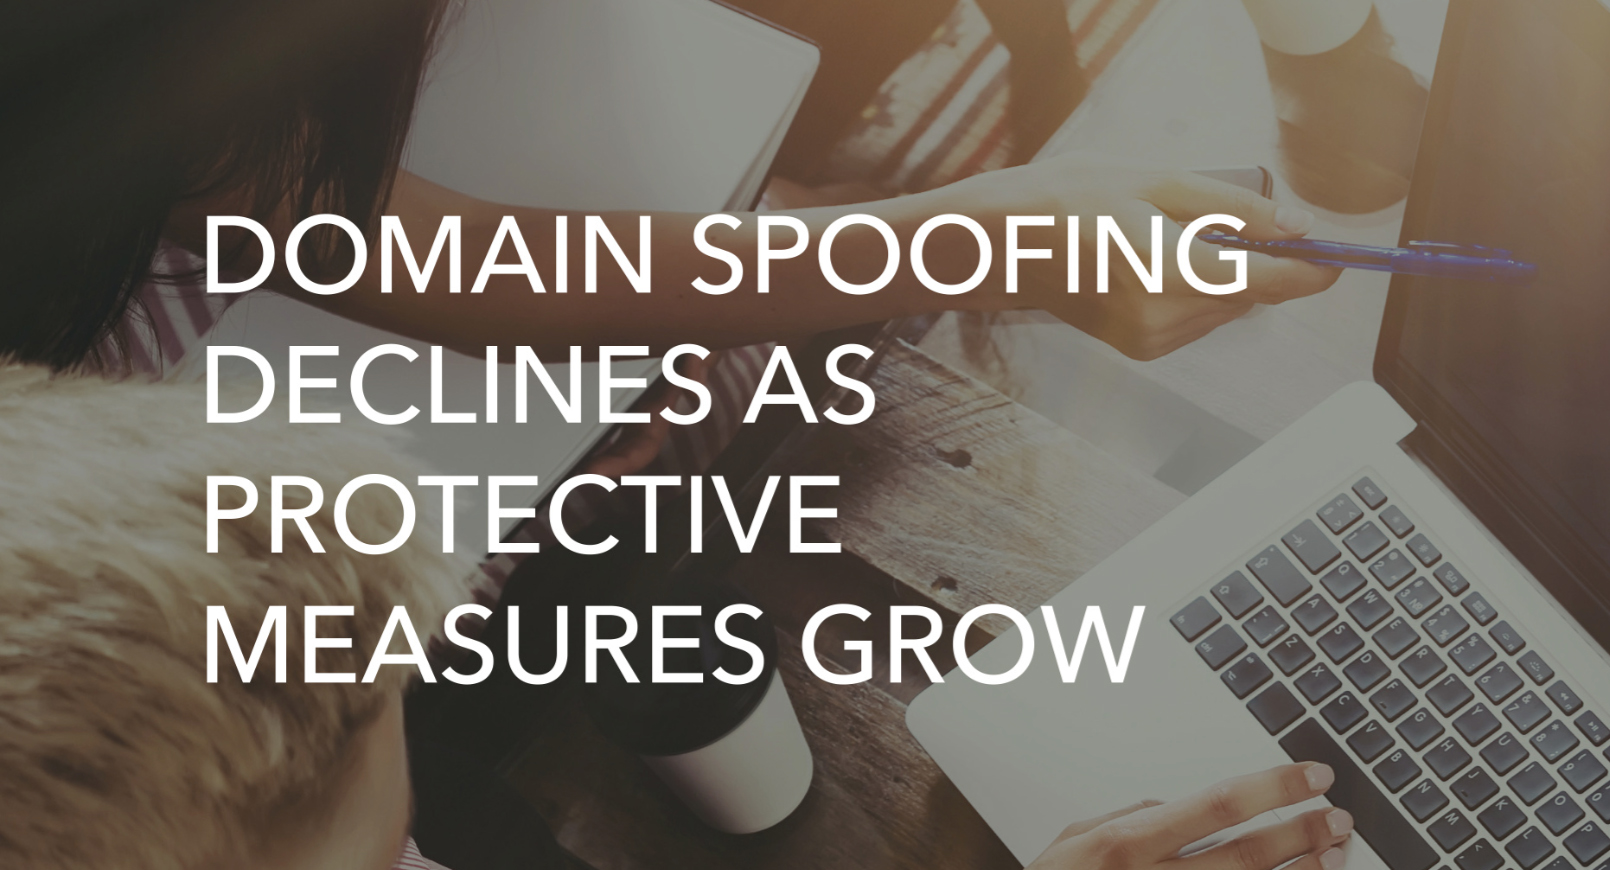 Domain spoofing declines as protective measures grow